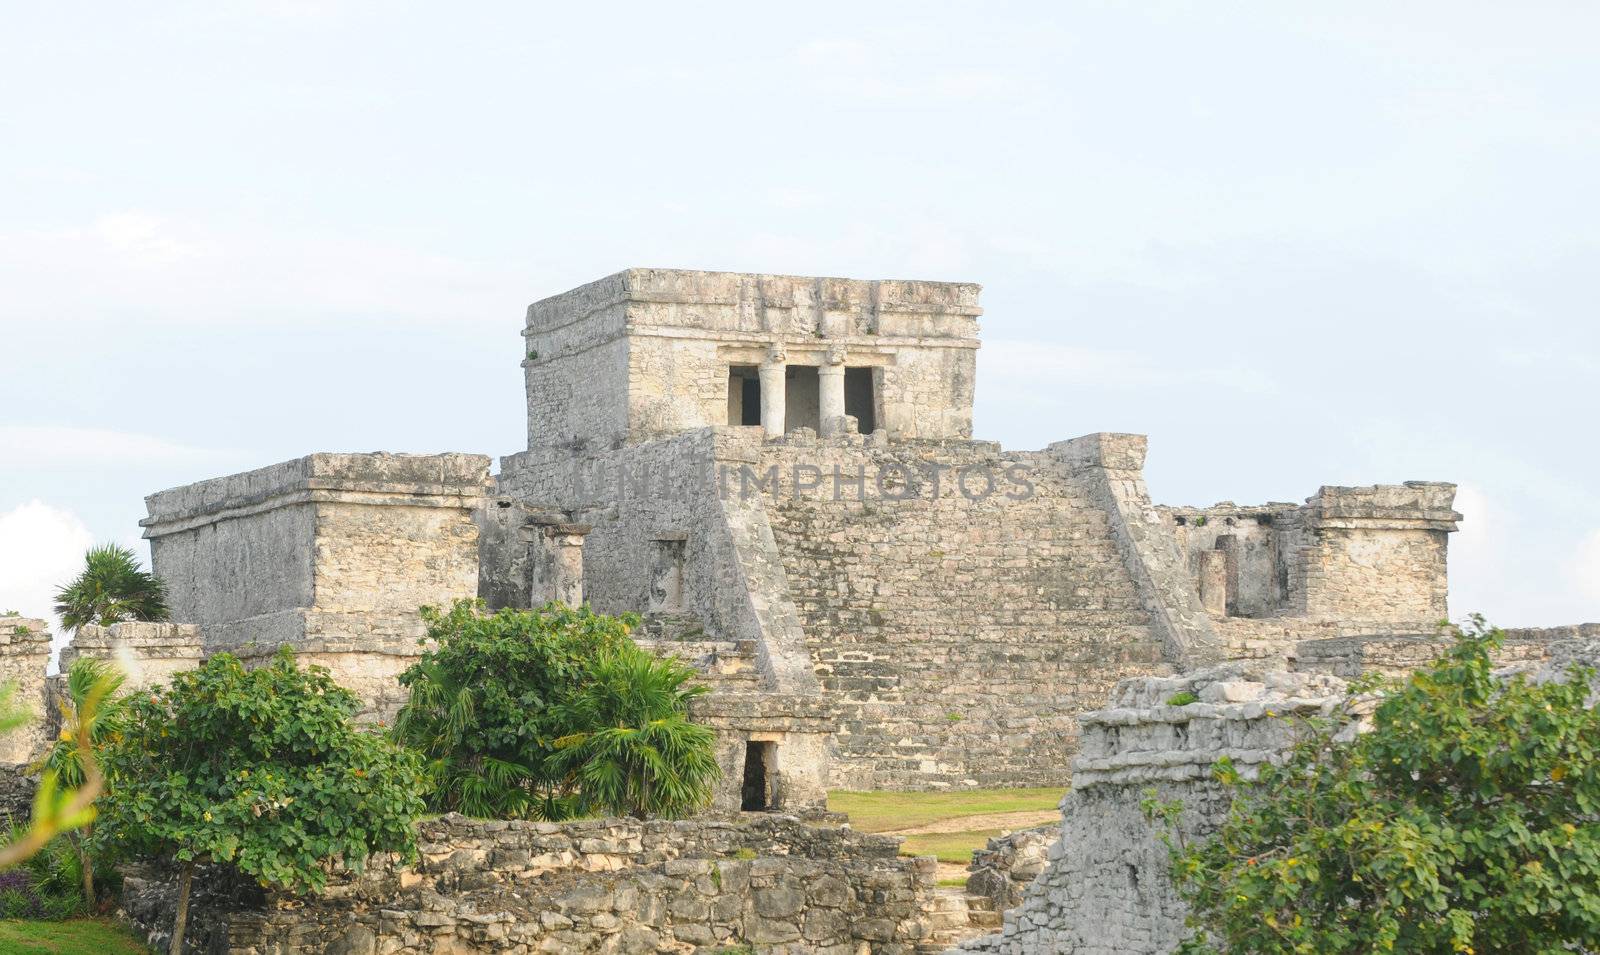 A Mayan Temple Used for Ceremonies by ftlaudgirl